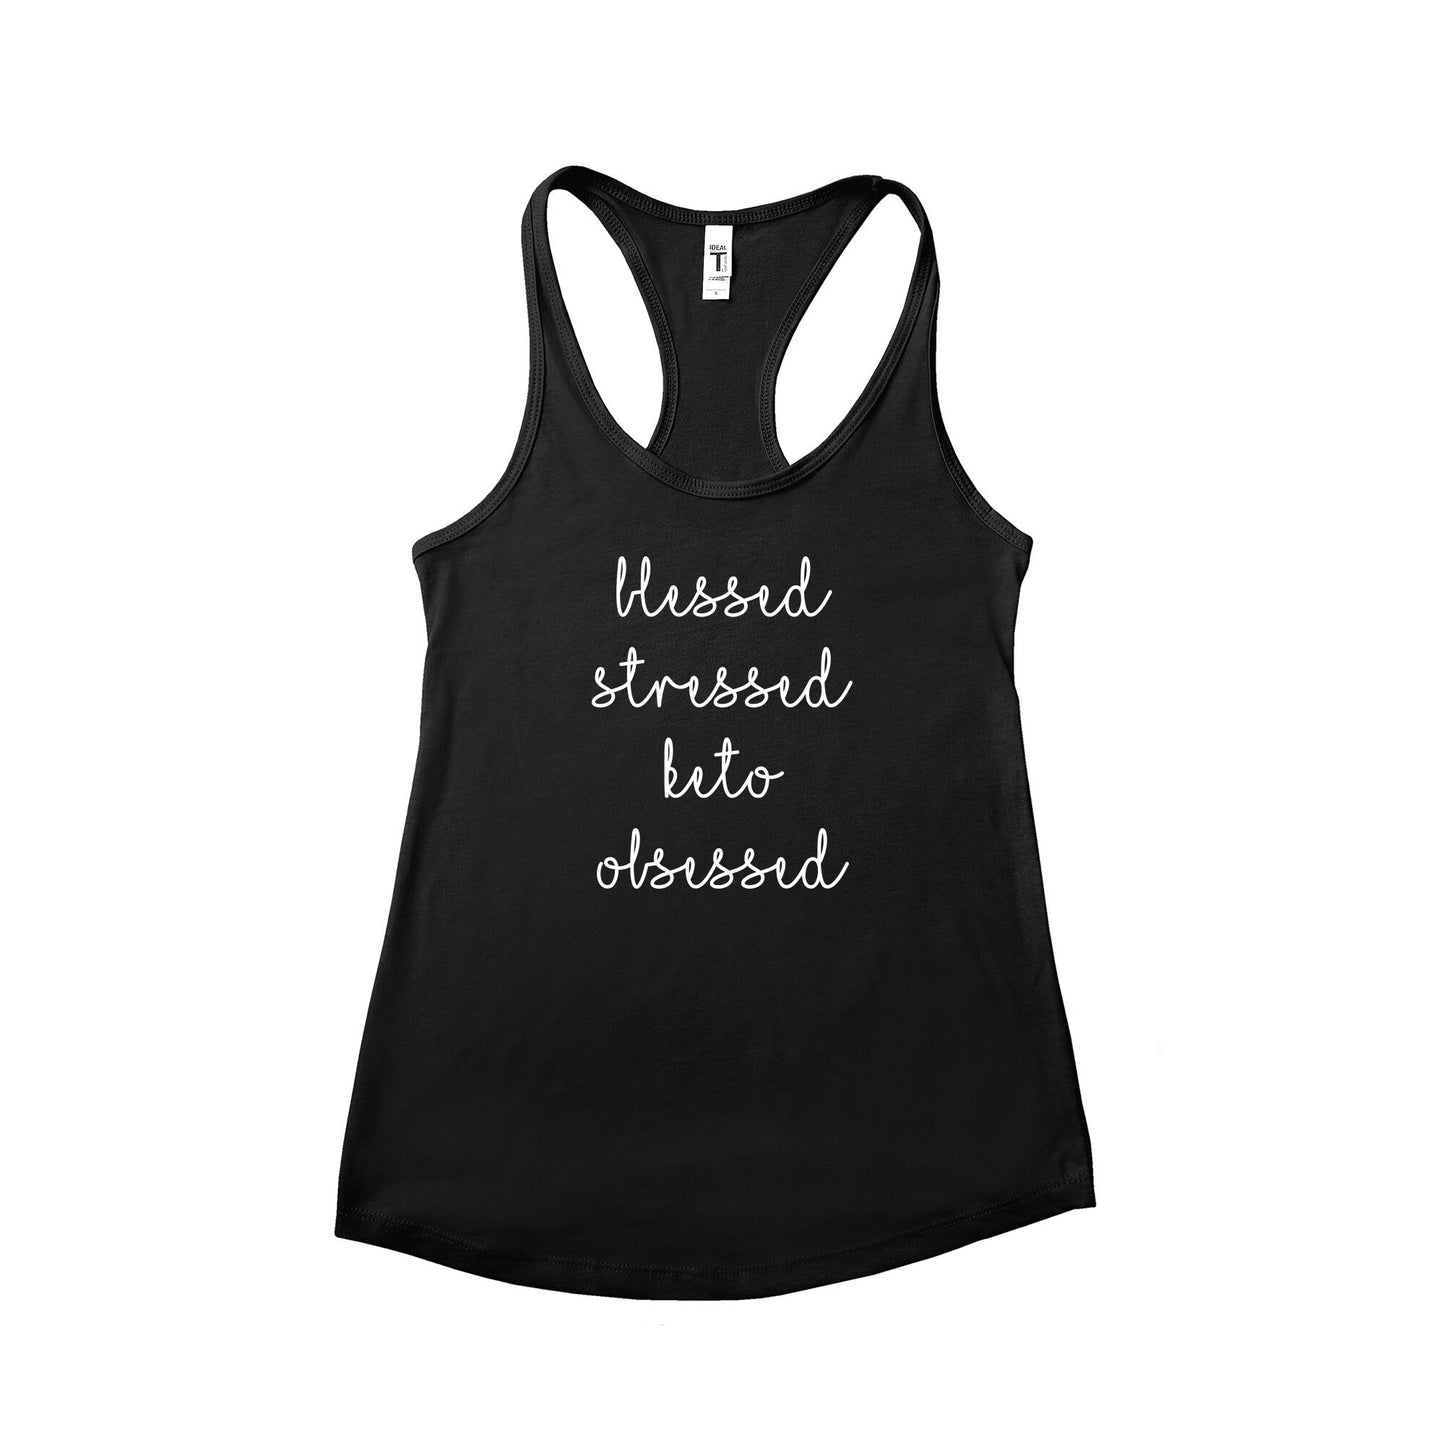 Blessed Stressed Keto Obsessed Tank